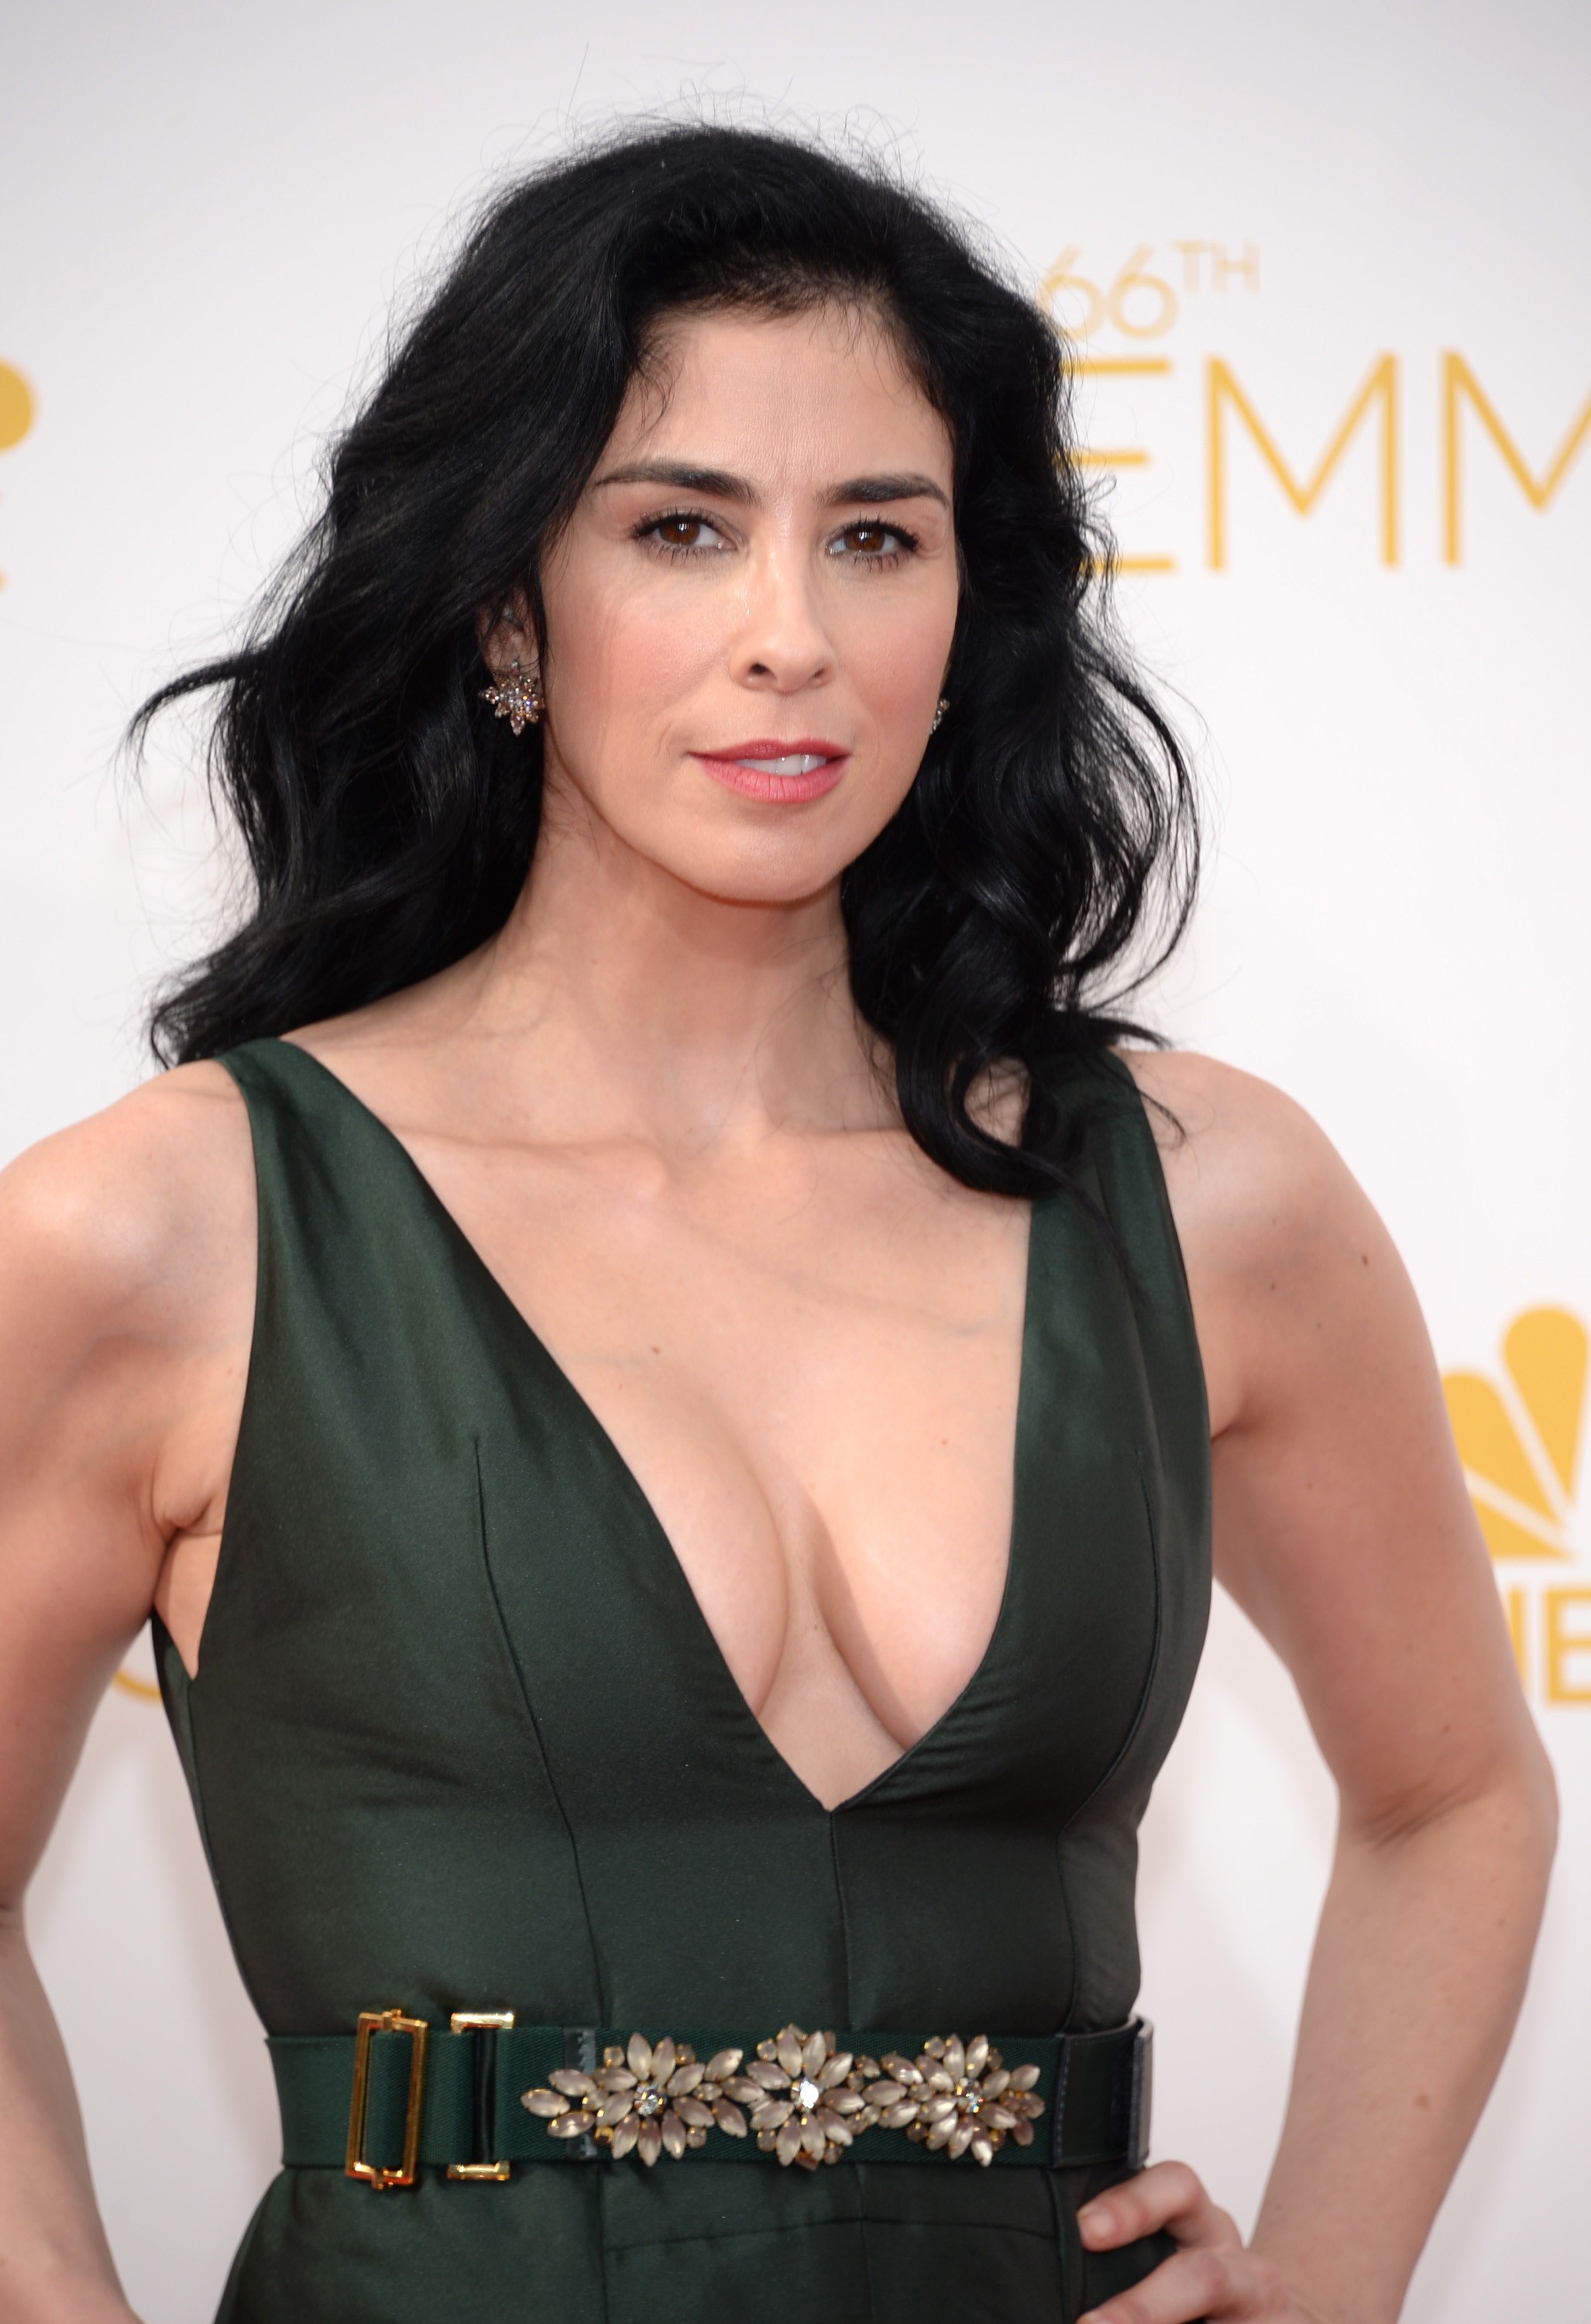 How tall is Sarah Silverman?